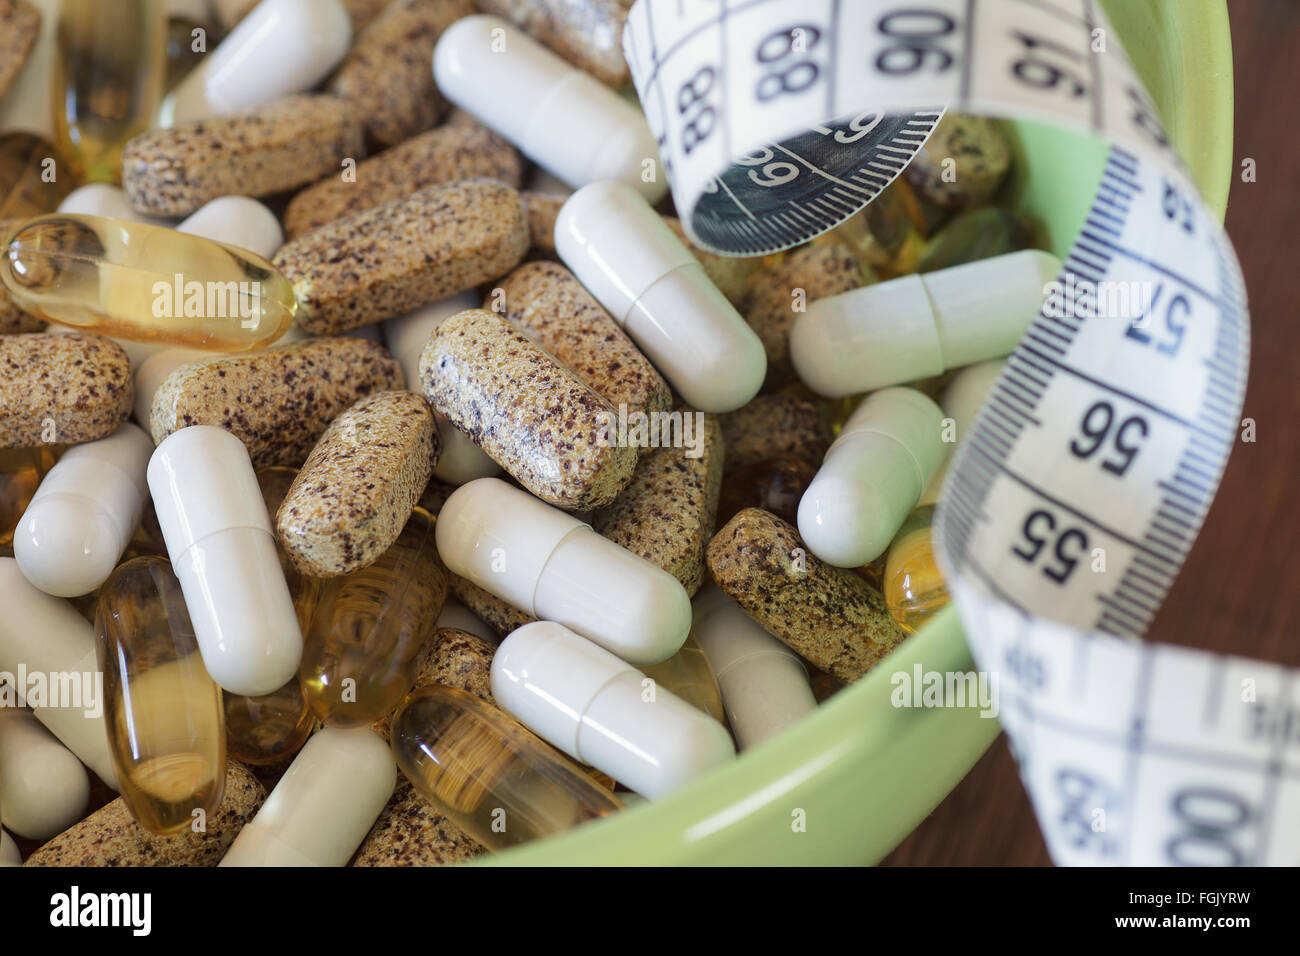 Nutritional supplements in capsules and tablets. Stock Photo